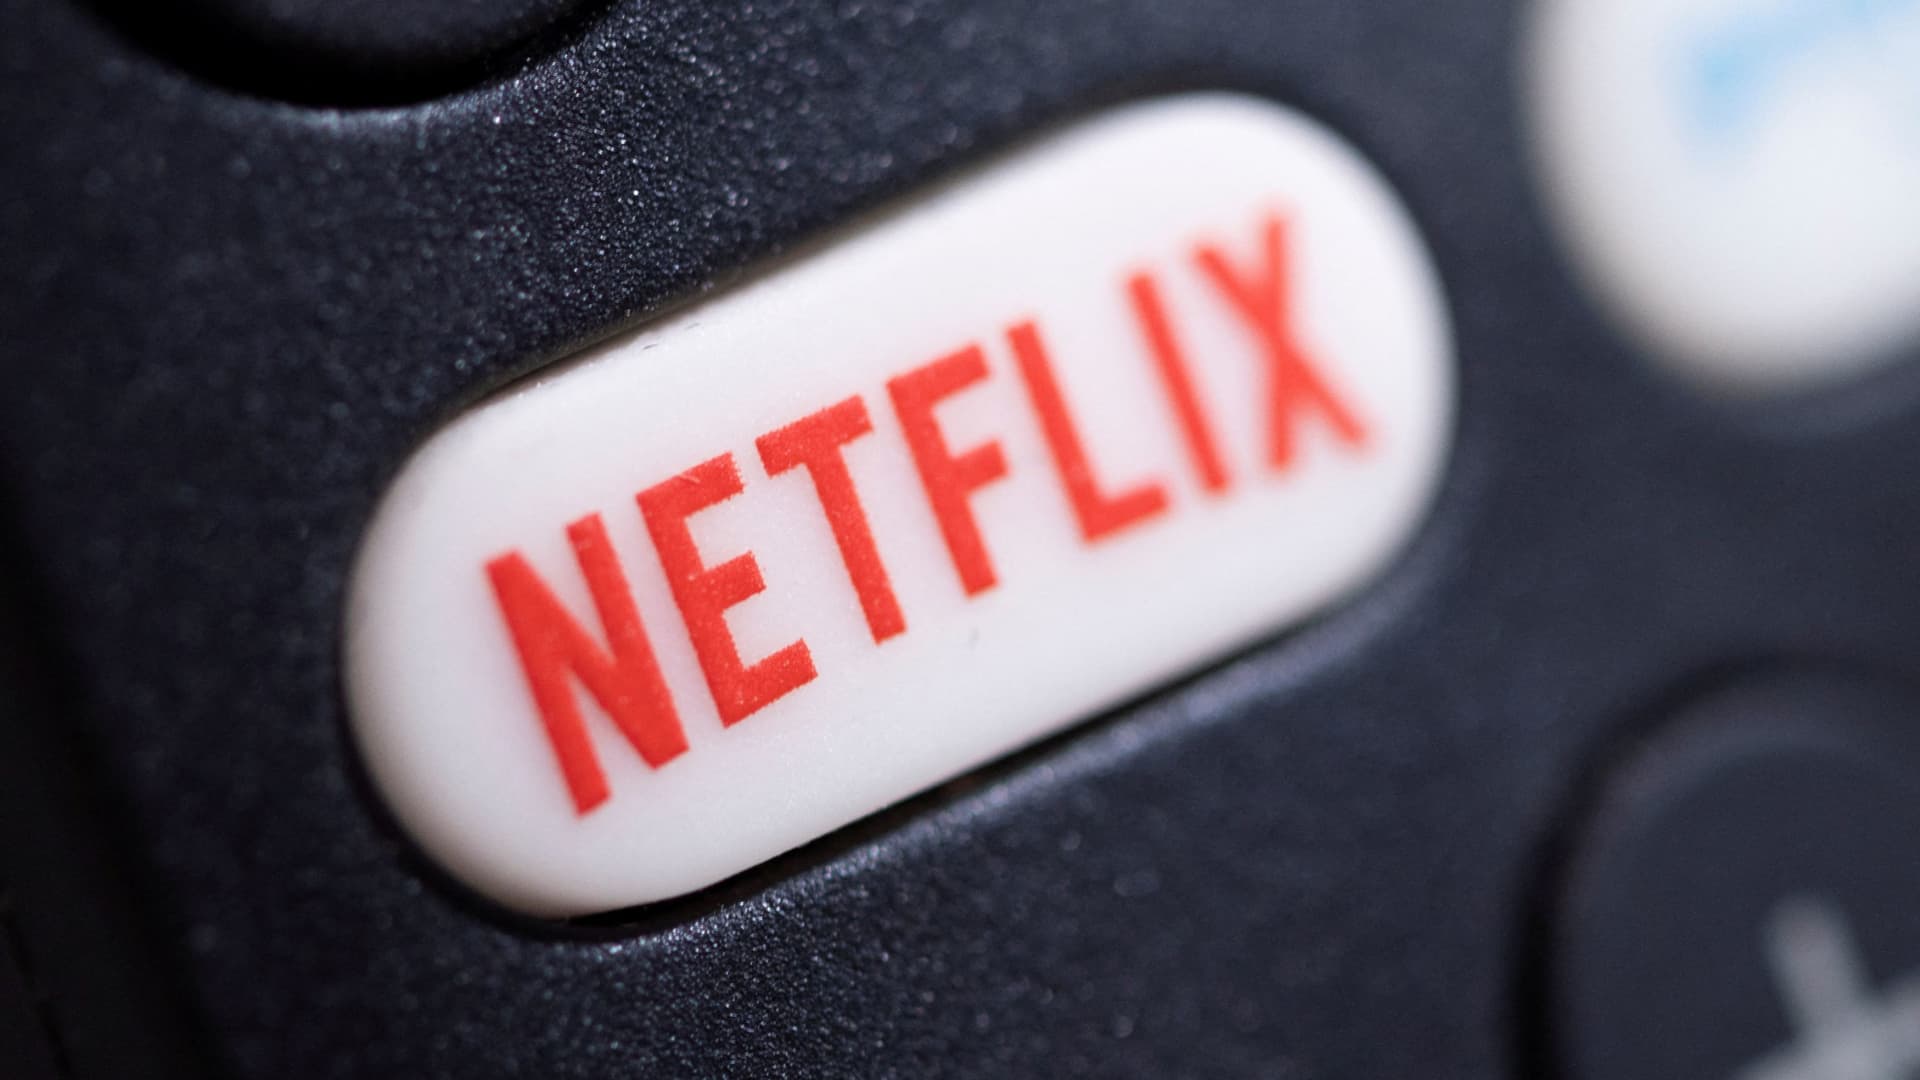 Netflix to charge $6.99 a month for ad-supported plan starting Nov. 3